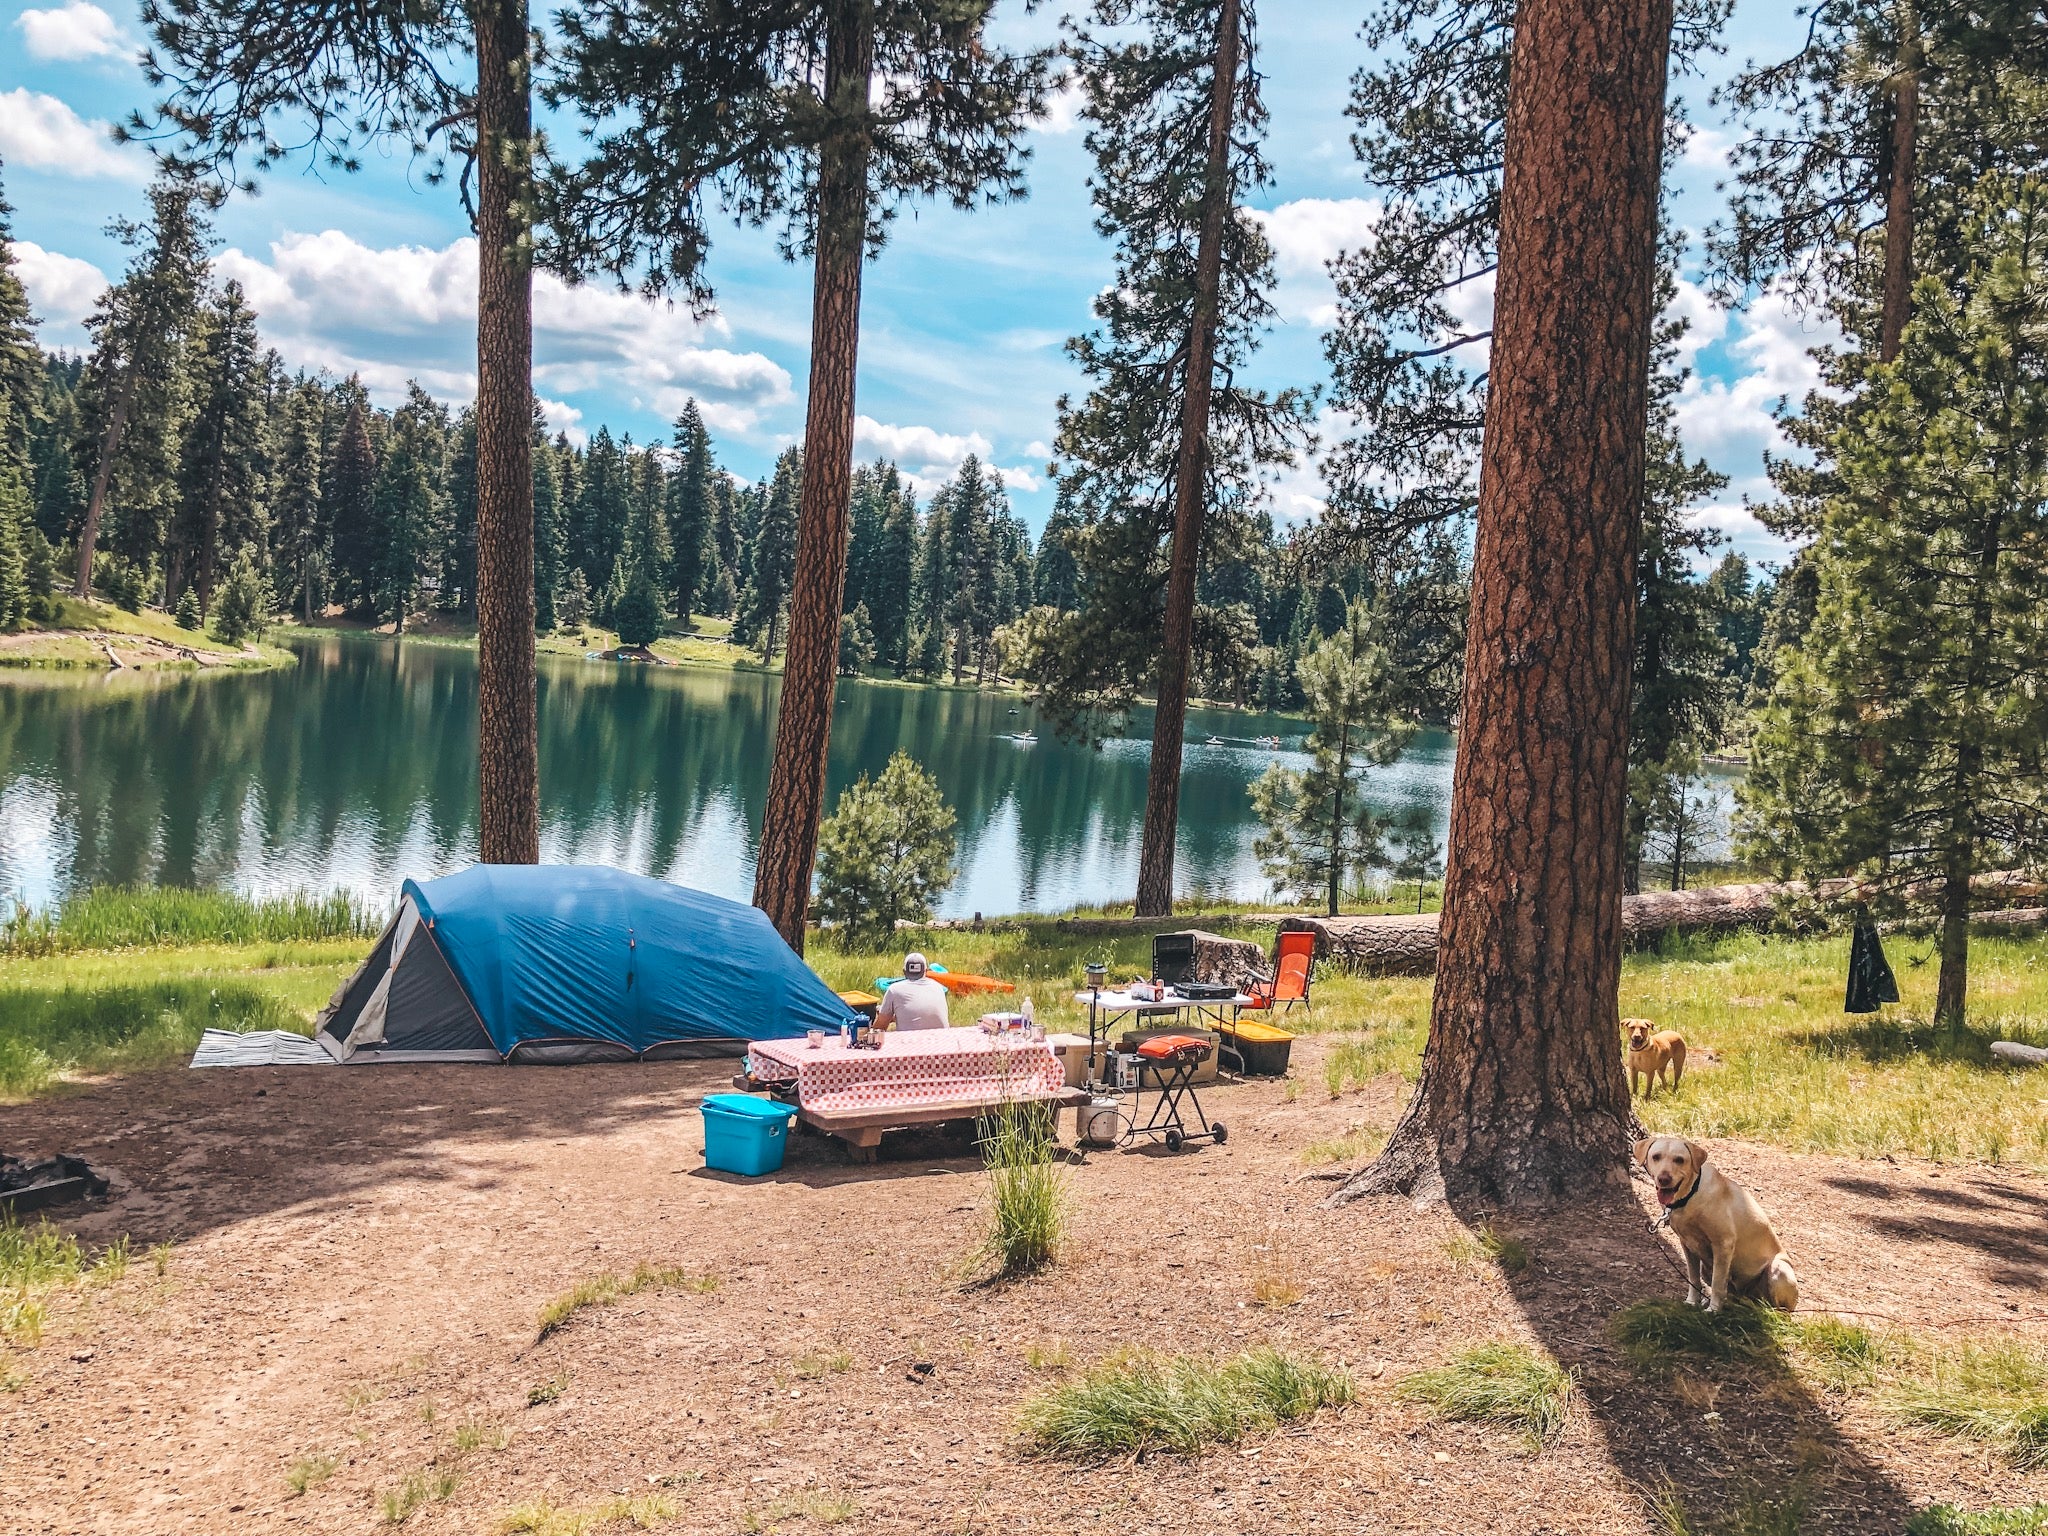 12 Great Camping Tips for Your Summer